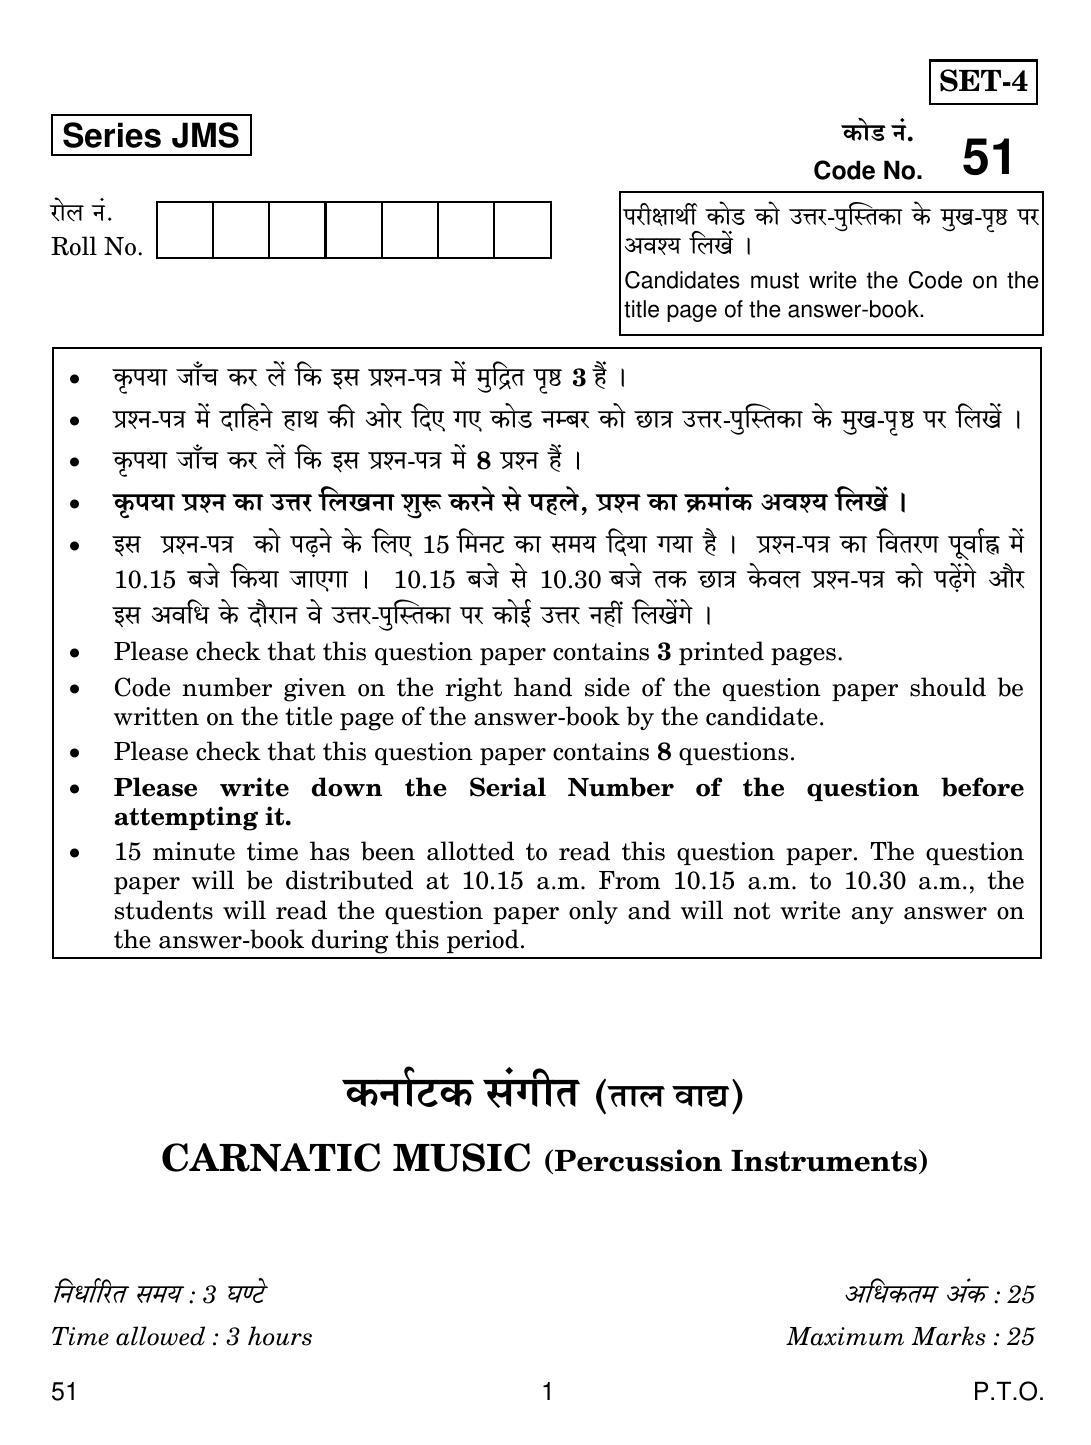 CBSE Class 10 51 CARNATIC MUSIC (Percussion Instruments) 2019 Question Paper - Page 1